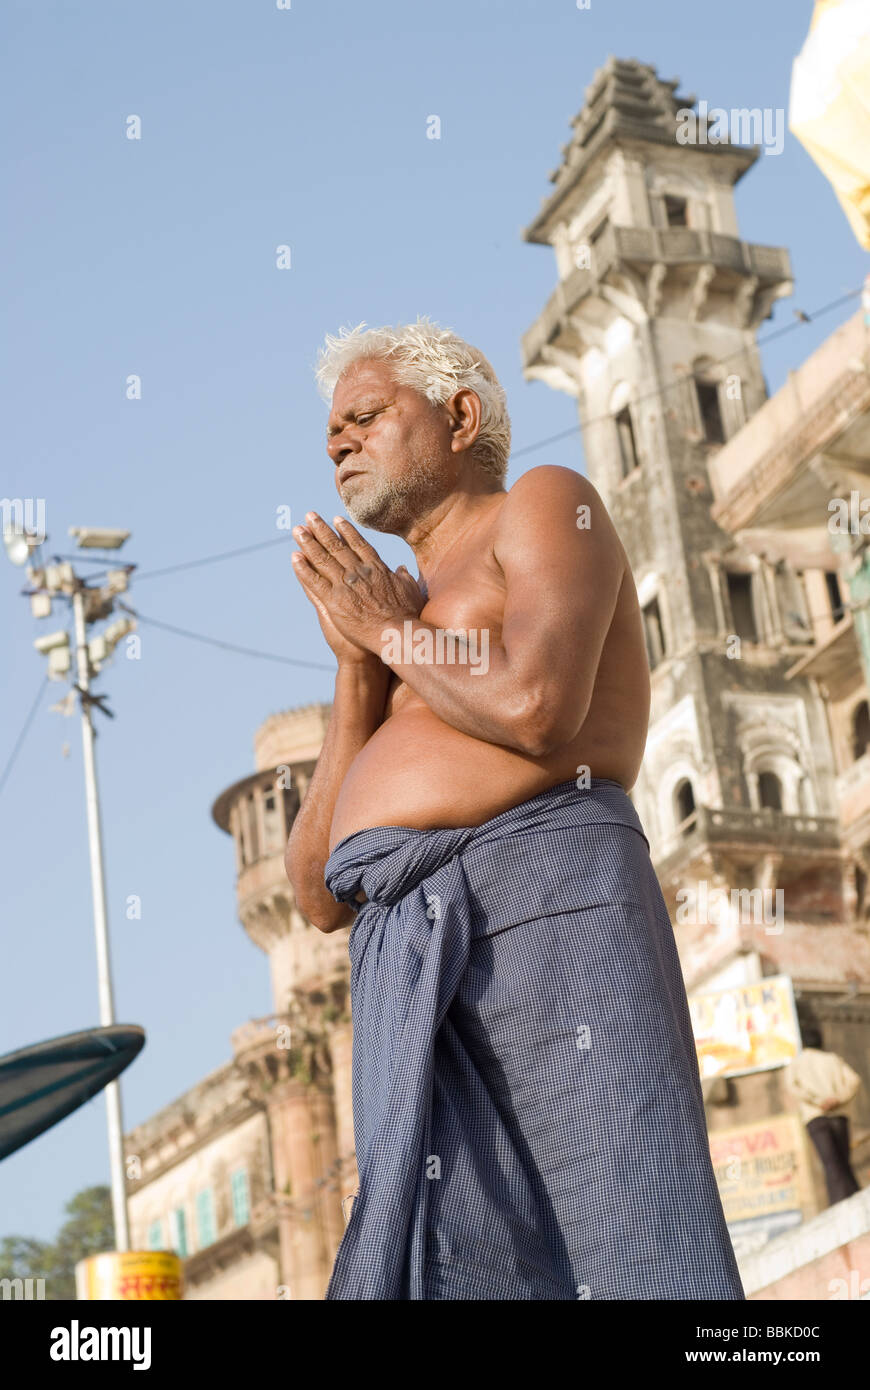 Holy man (brahmins) praying and making offering for river Ganges, holy for the Hindu. Bathing ghats, Varanasi, India. Stock Photo